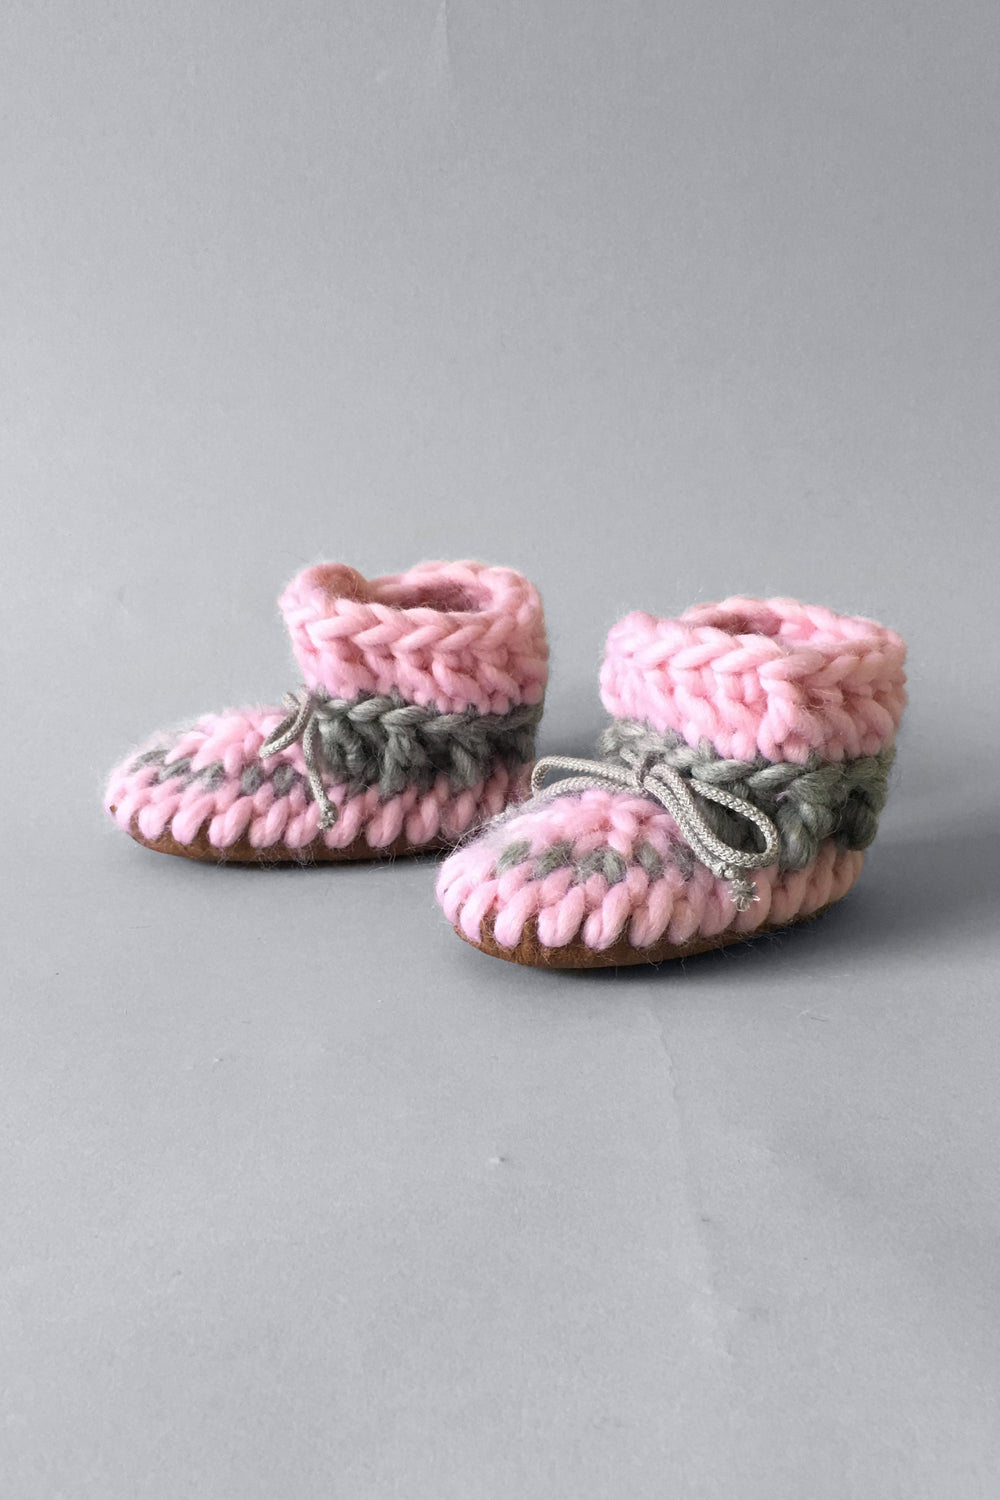 woolen kids boots pink handmade upcycled